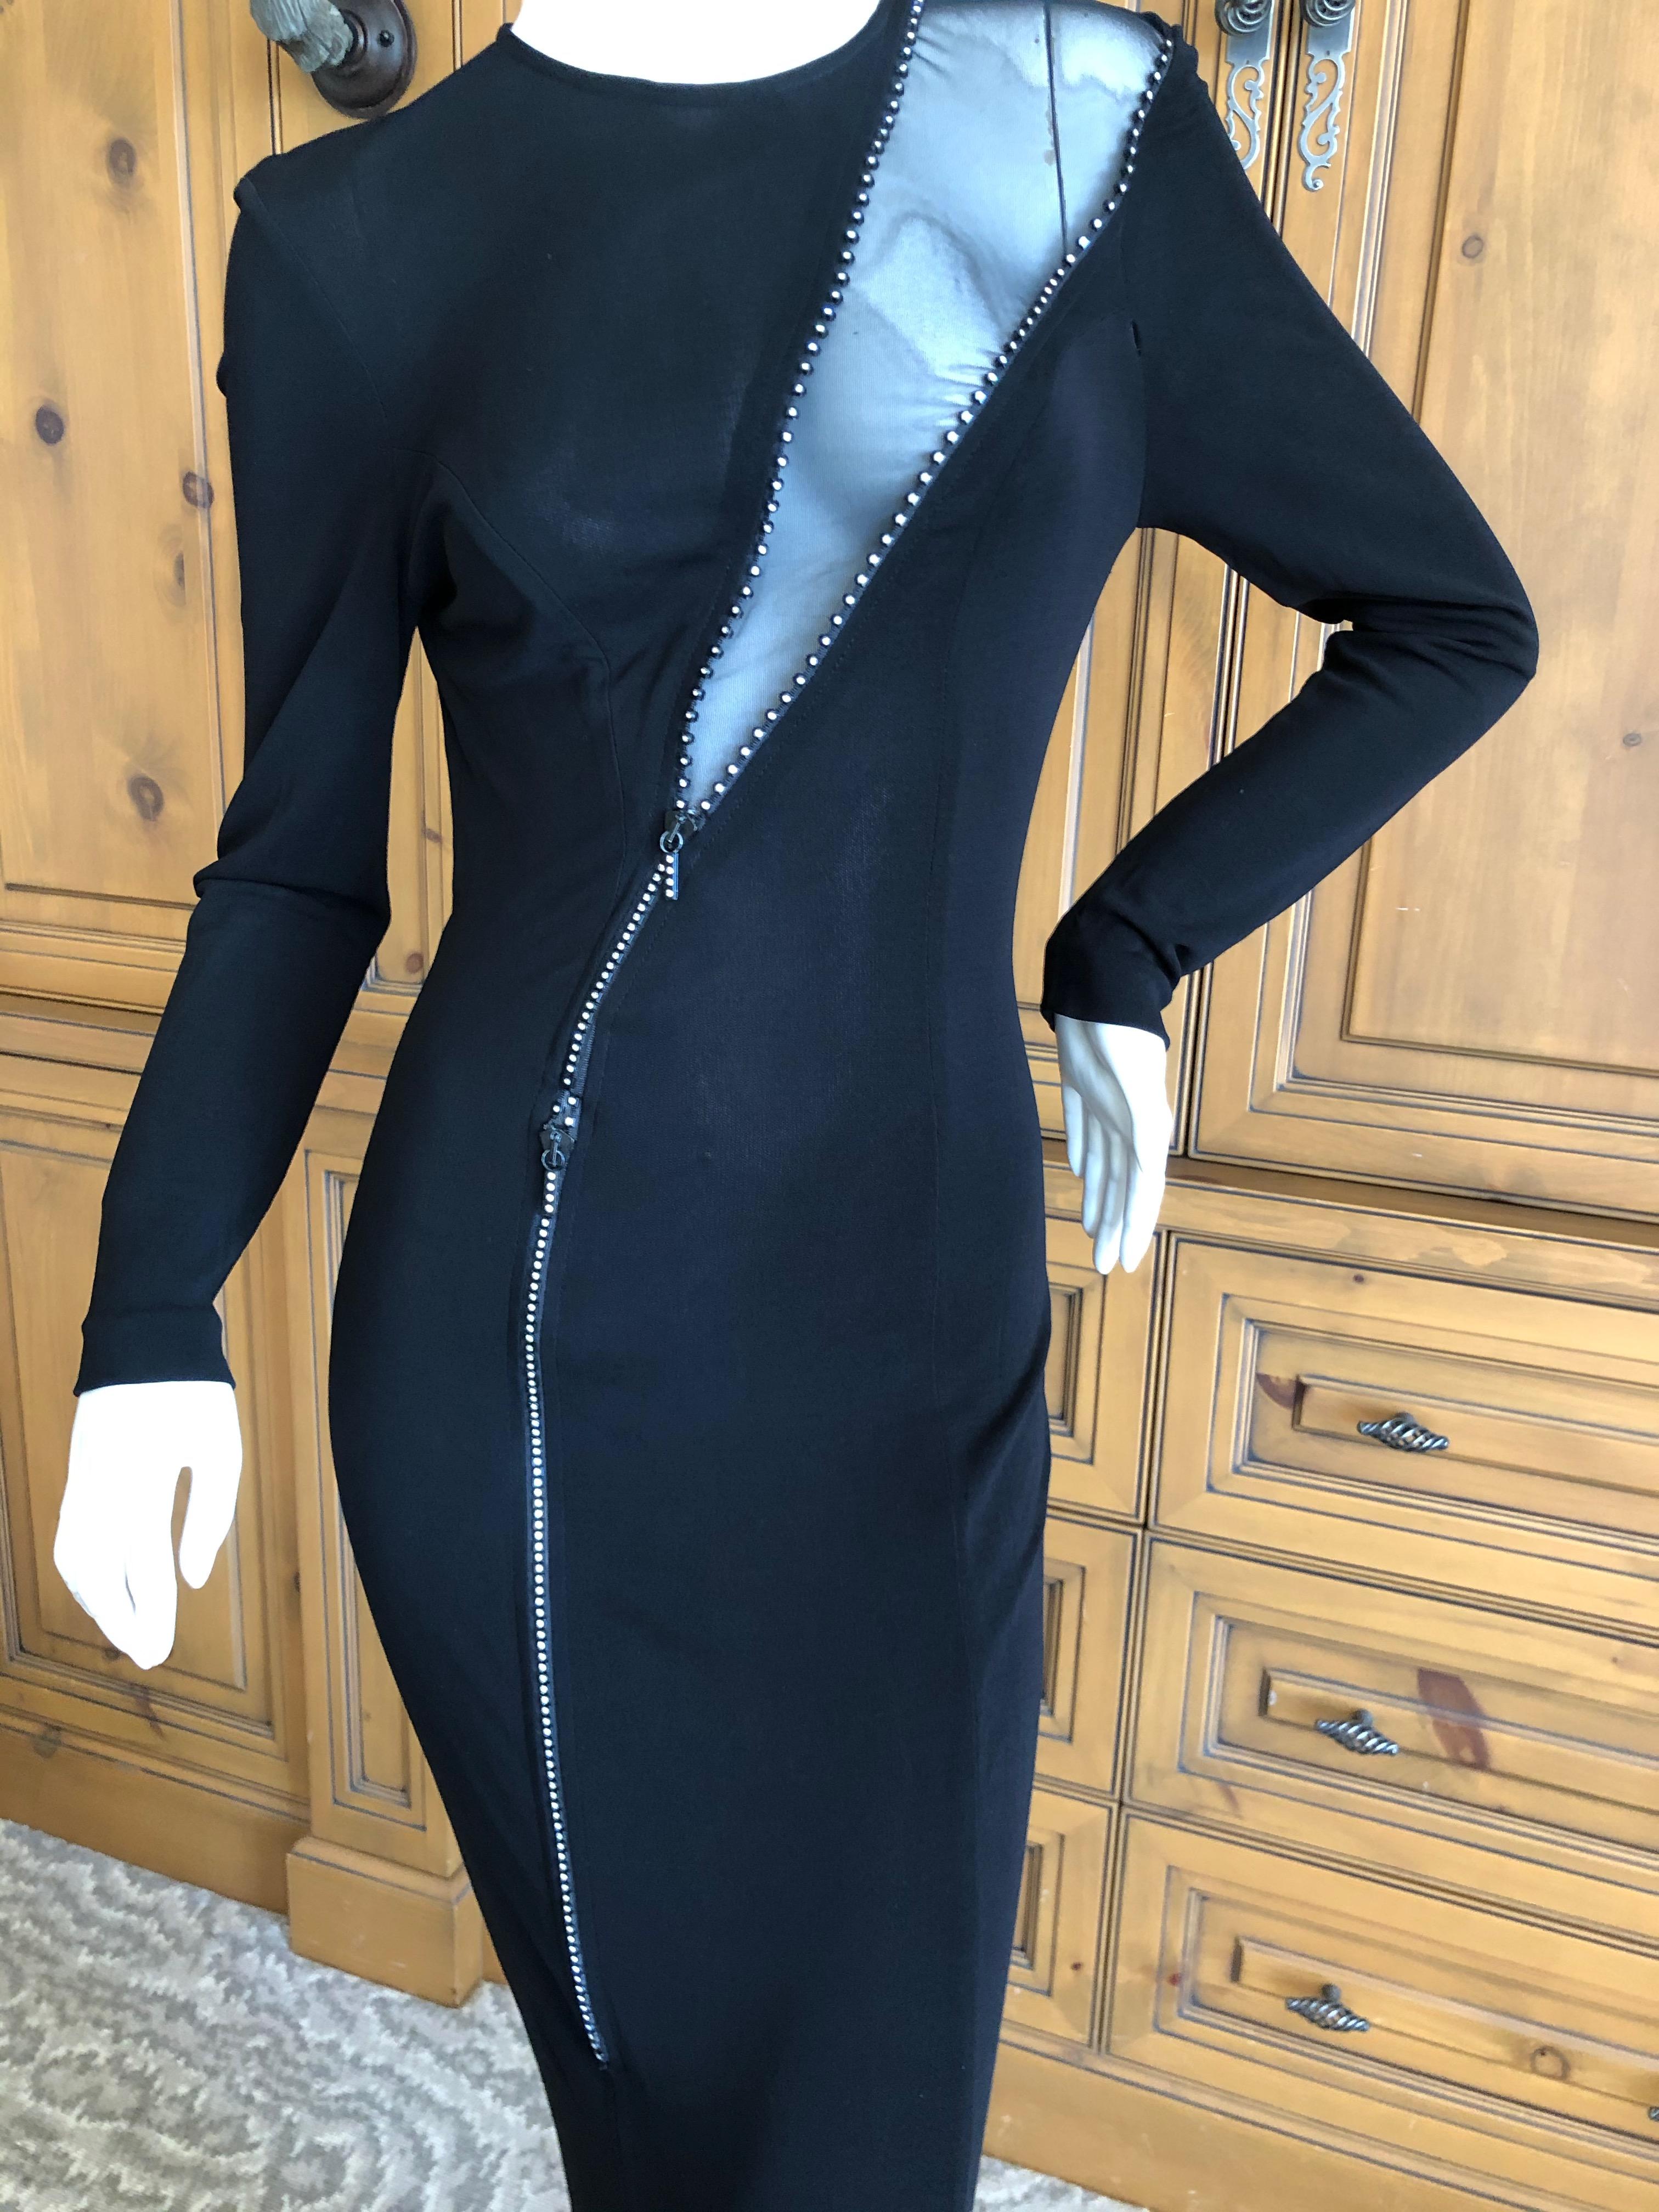 Thierry Mugler Vintage 1980's Black Evening Dress w Sheer Crystal Zipper Details In Good Condition For Sale In Cloverdale, CA